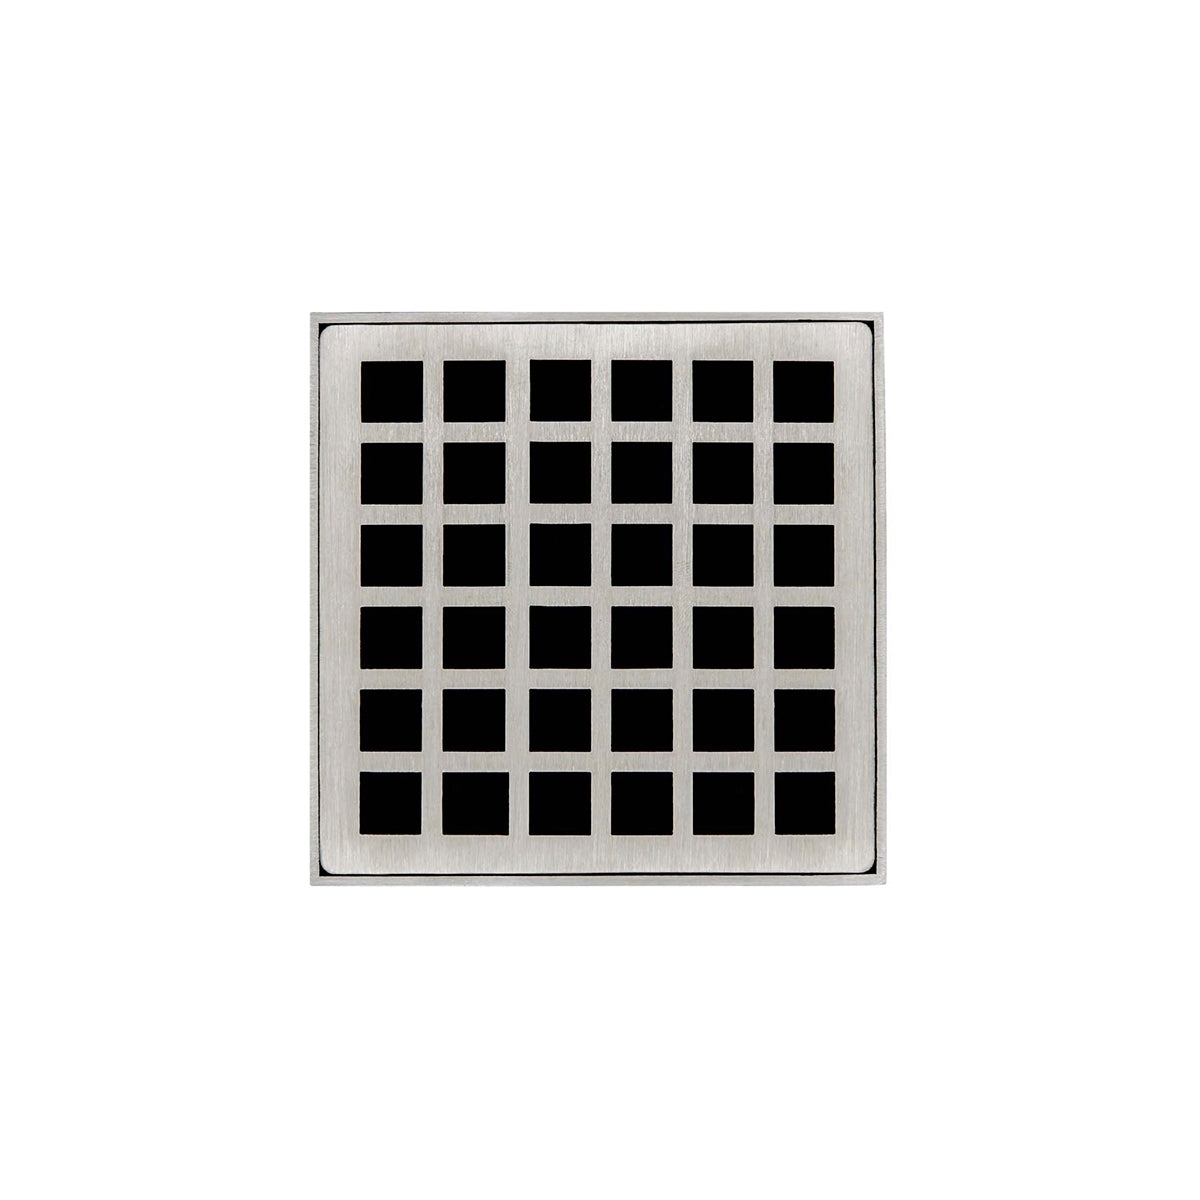 Infinity Drain 4" x 4" QD 4 Premium Center Drain Kit with Squares Pattern Decorative Plate with ABS Drain Body, 2" Outlet